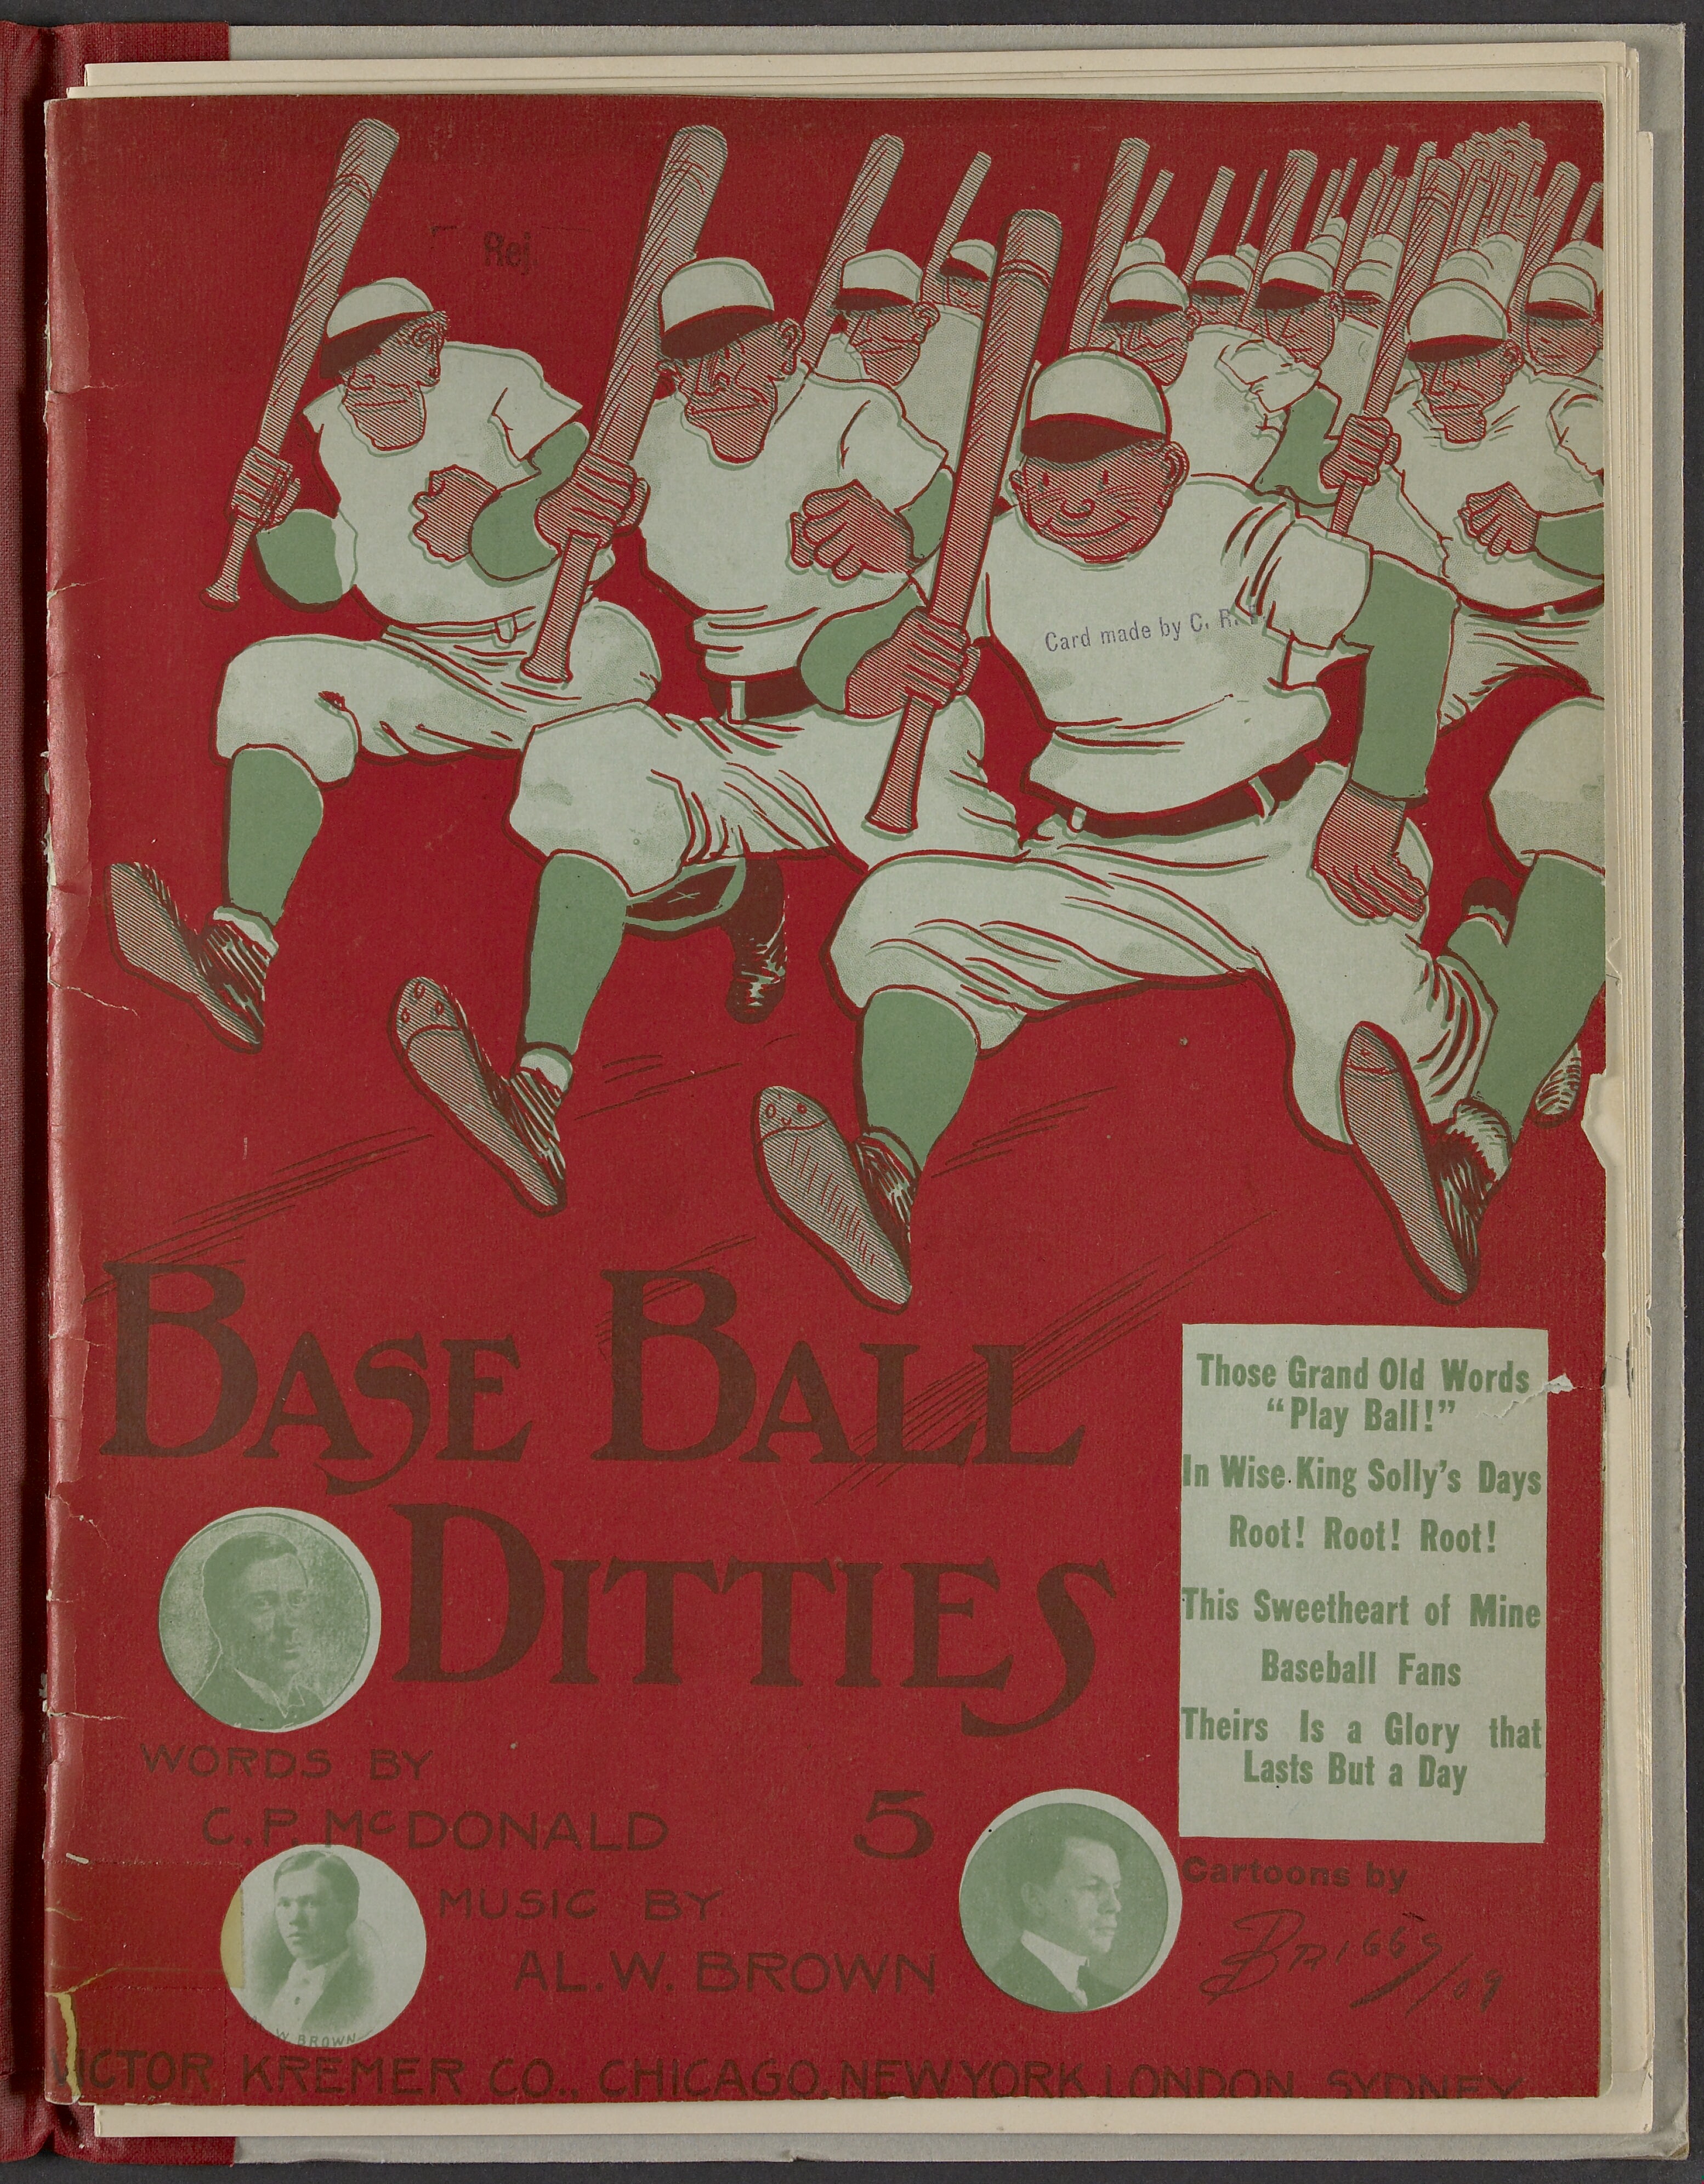 Baseball Music cover - Library of Congress